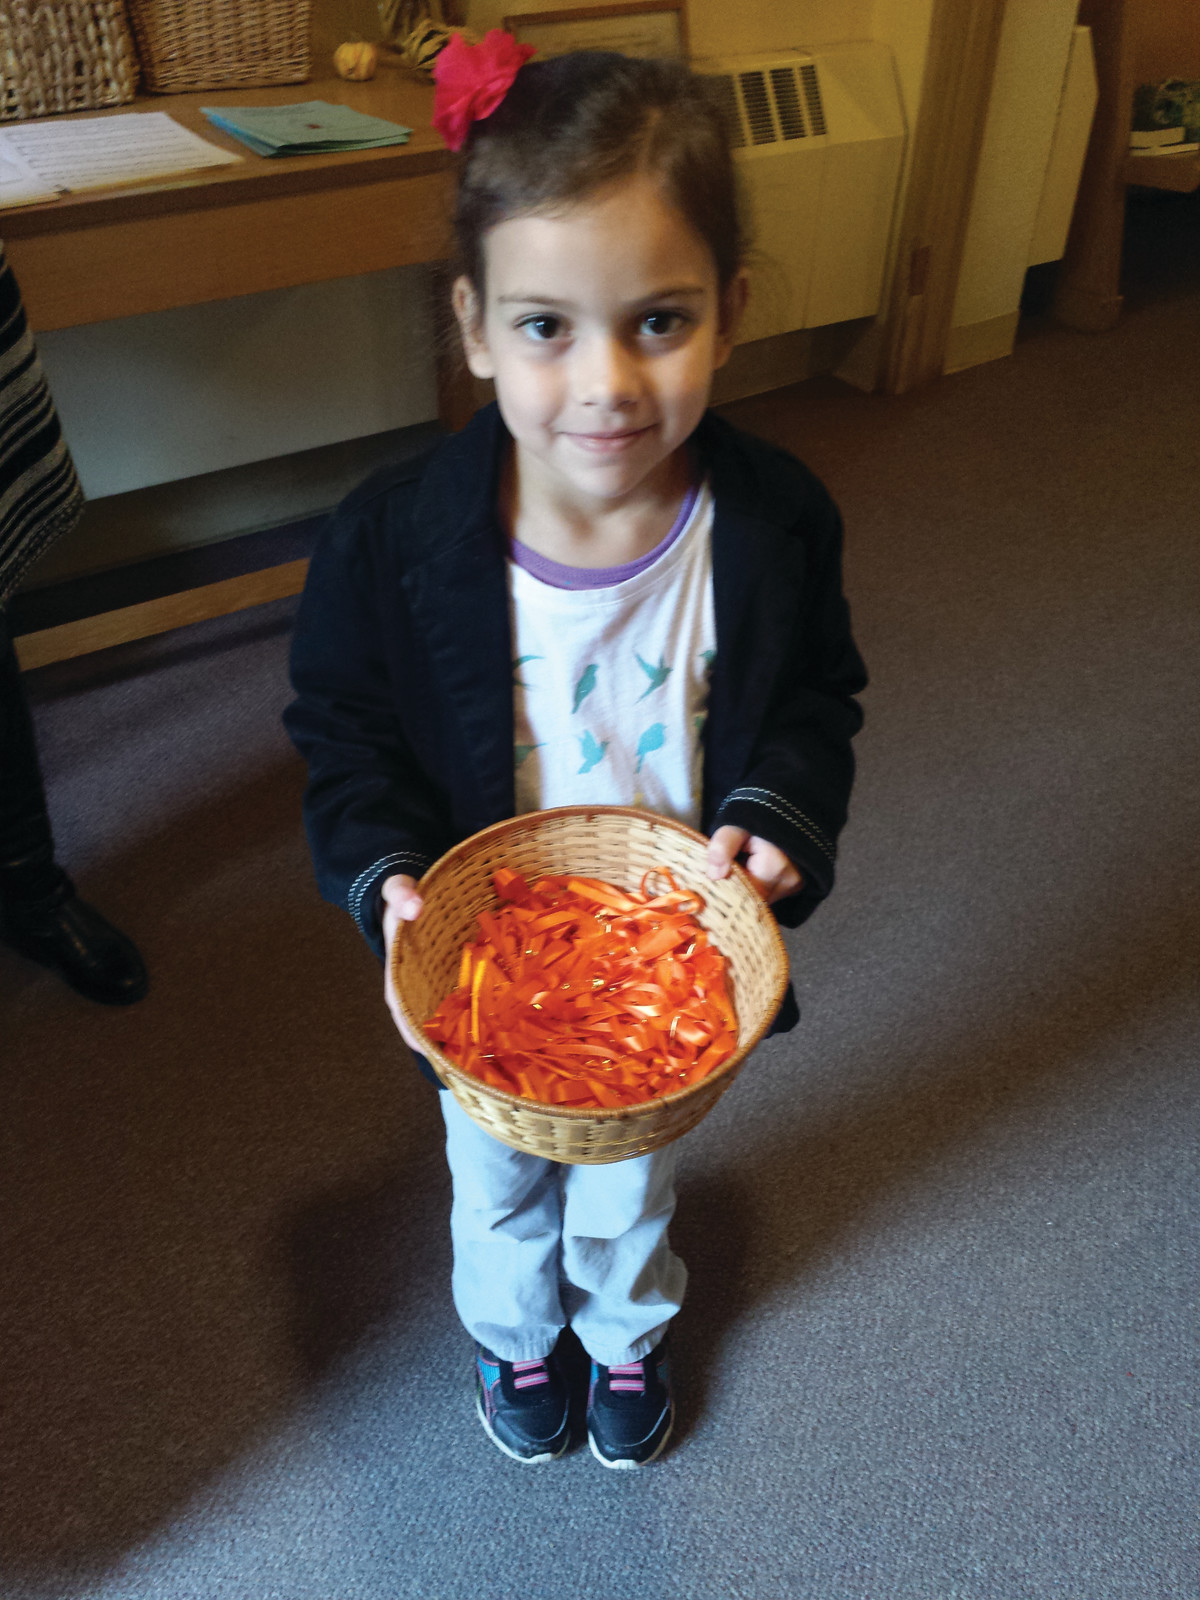 A RIBBON OF THANKS: At the St. David’s on the Hill Youth Sunday services on Nov. 1, Carina Hutnak handed out orange ribbons created by the Sunday school students to the parishioners as they dropped off their donations for the Interfaith Food Pantry.